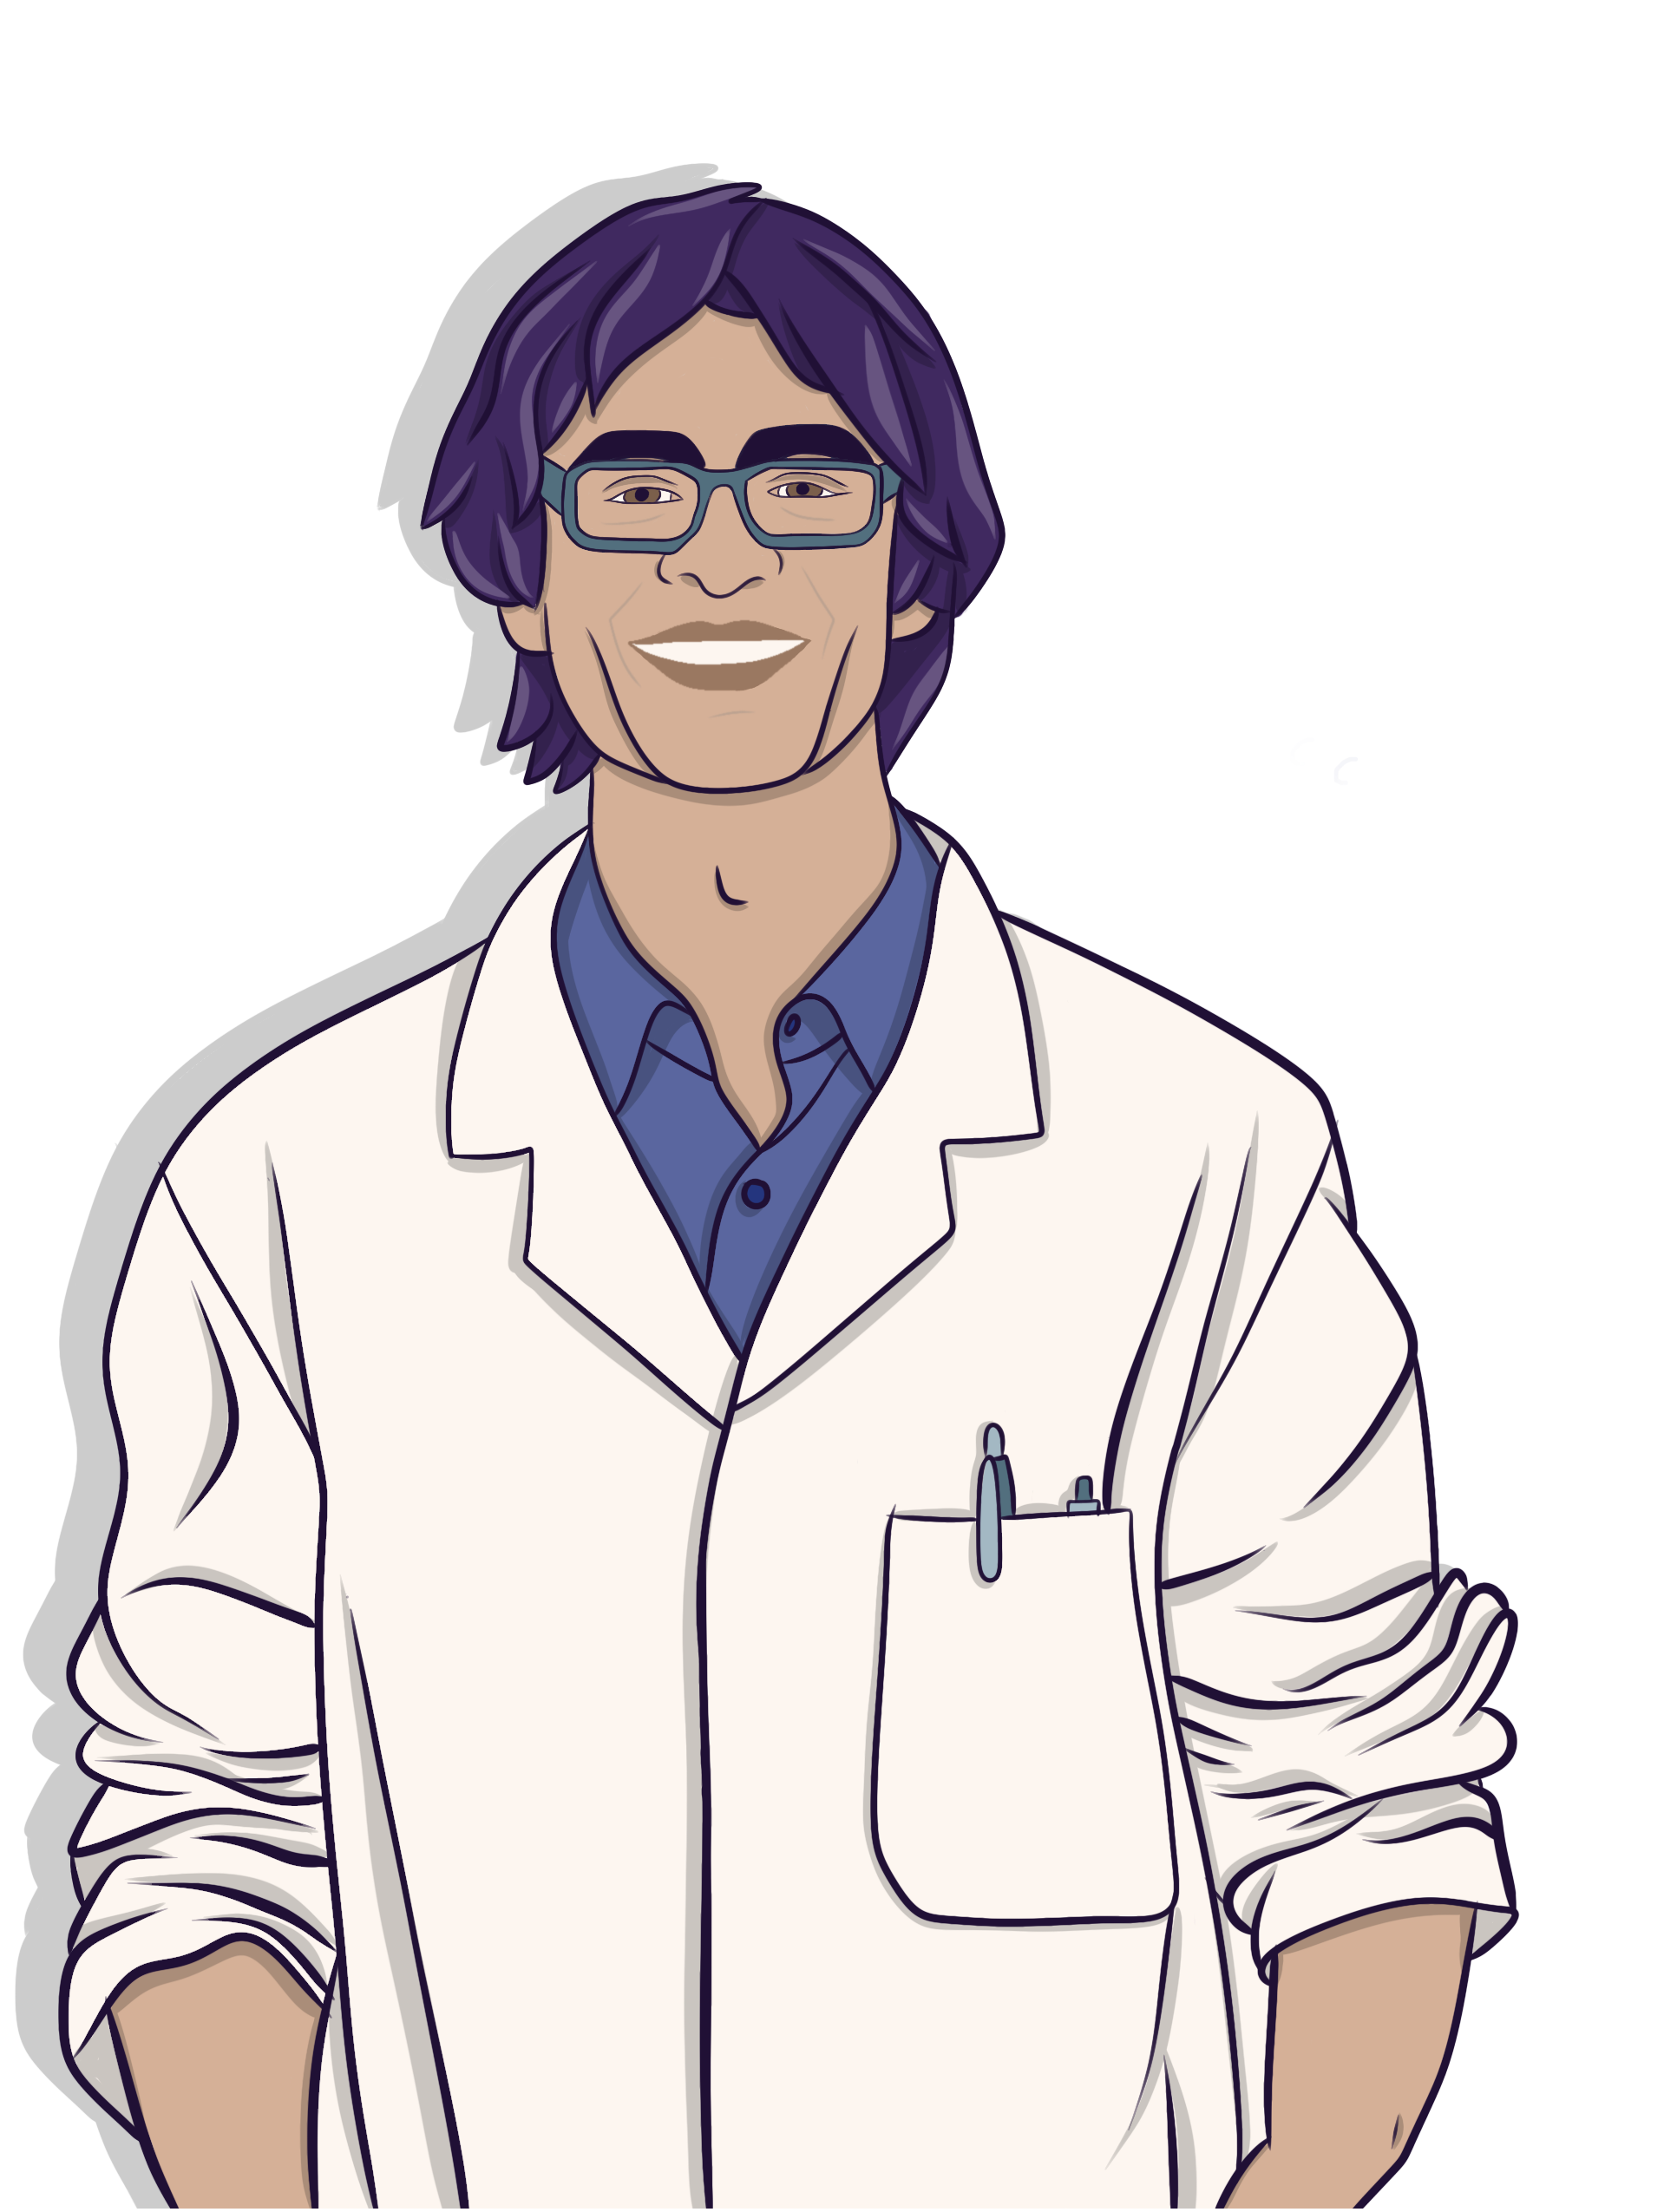 Smiling young man in lab coat.